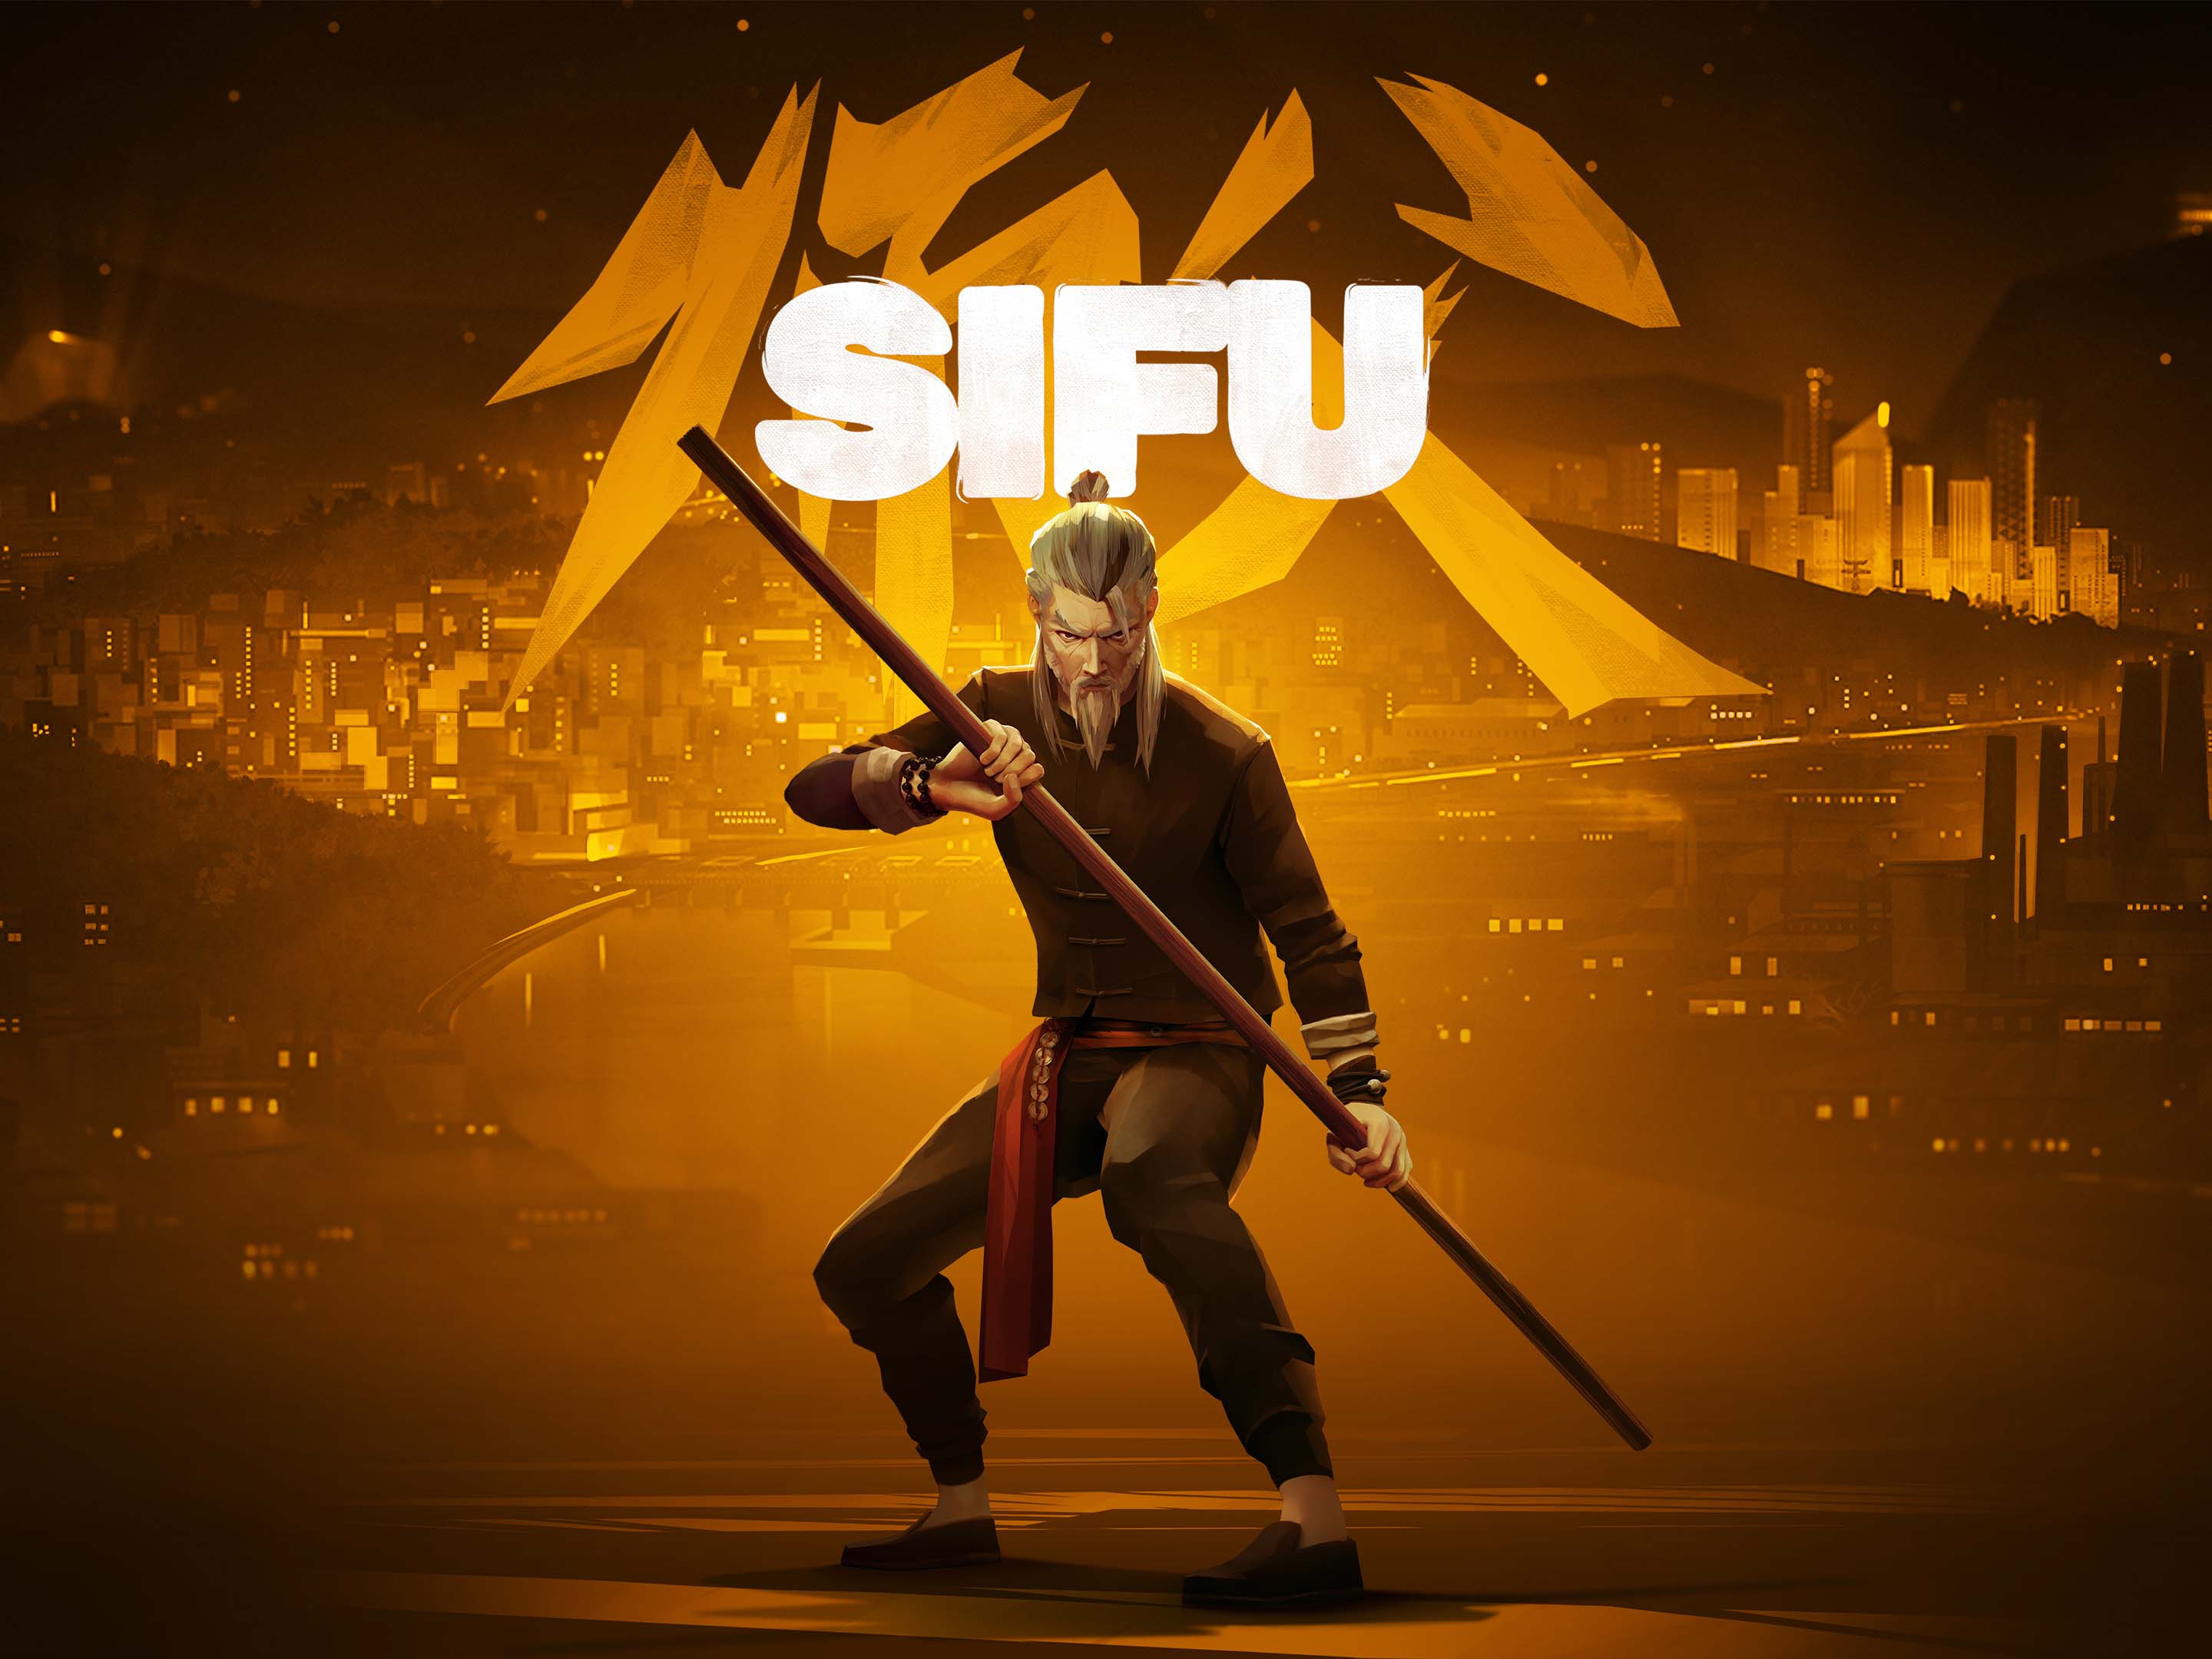 Sifu revealed during Sony State of Play, coming to PS5 and PS4 in